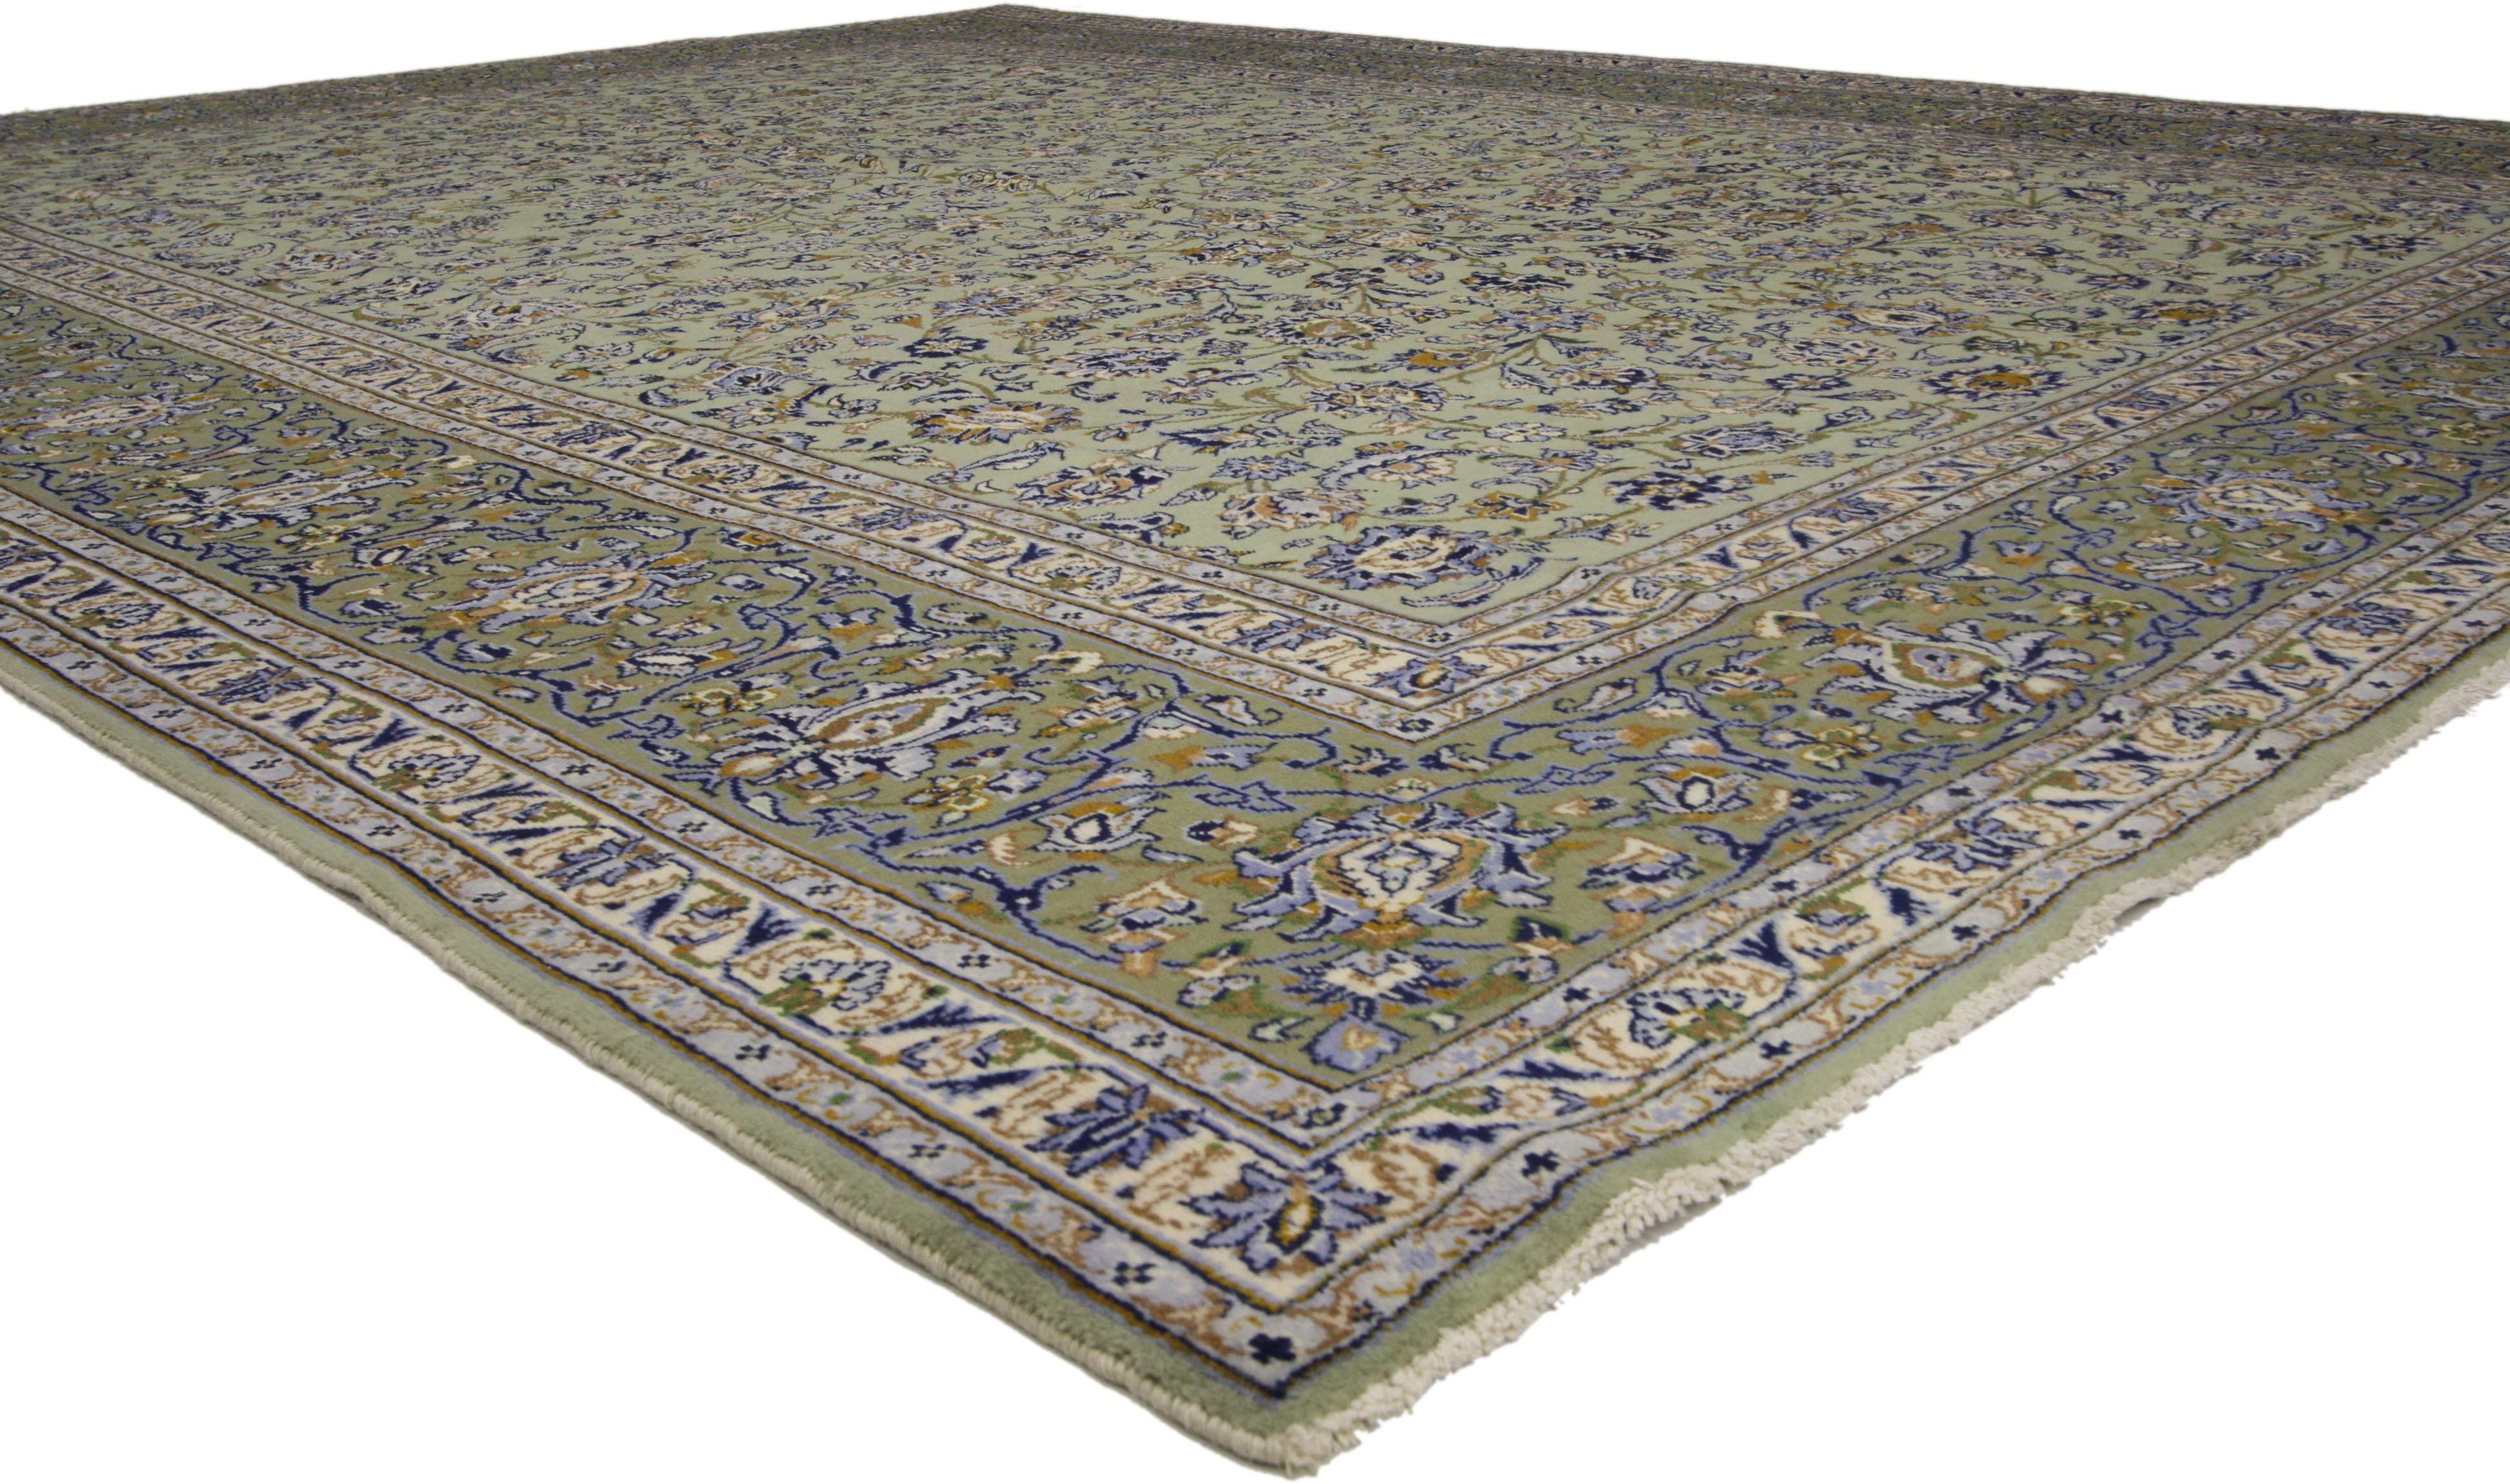 75922, Vintage Persian Yazd Area Rug with French Country Style 09'08 x 12'08. Bursting with a floral abundance in a myriad of colors, this Vintage Persian Yazd rug features an endlessly fascinating allover pattern against an abrash Ed celadon